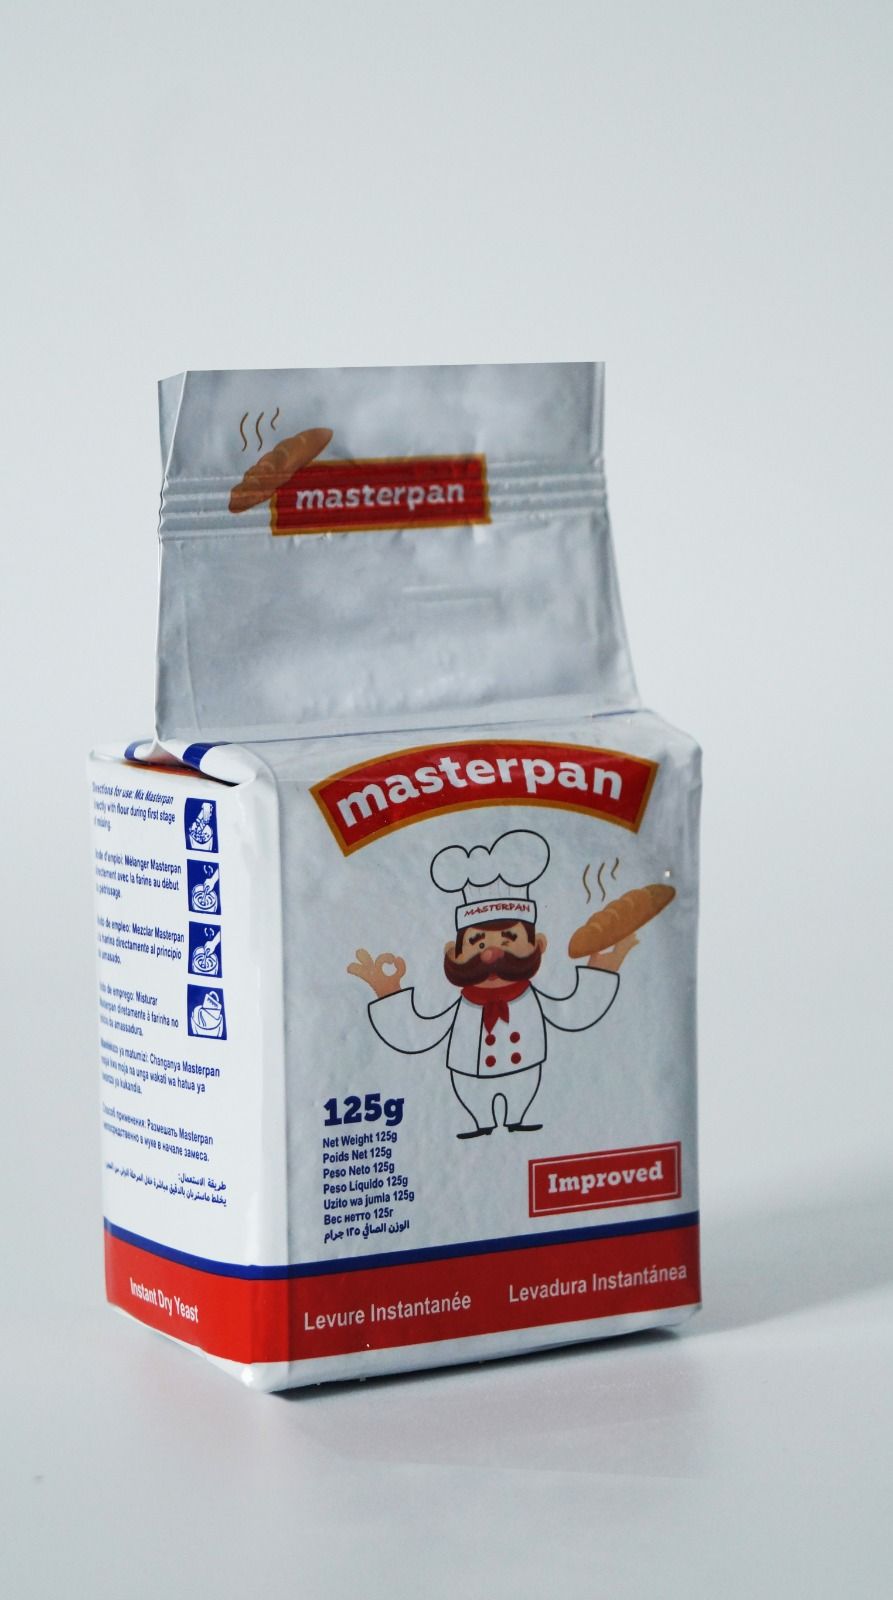 MASTERPAN Instant Dry Yeast